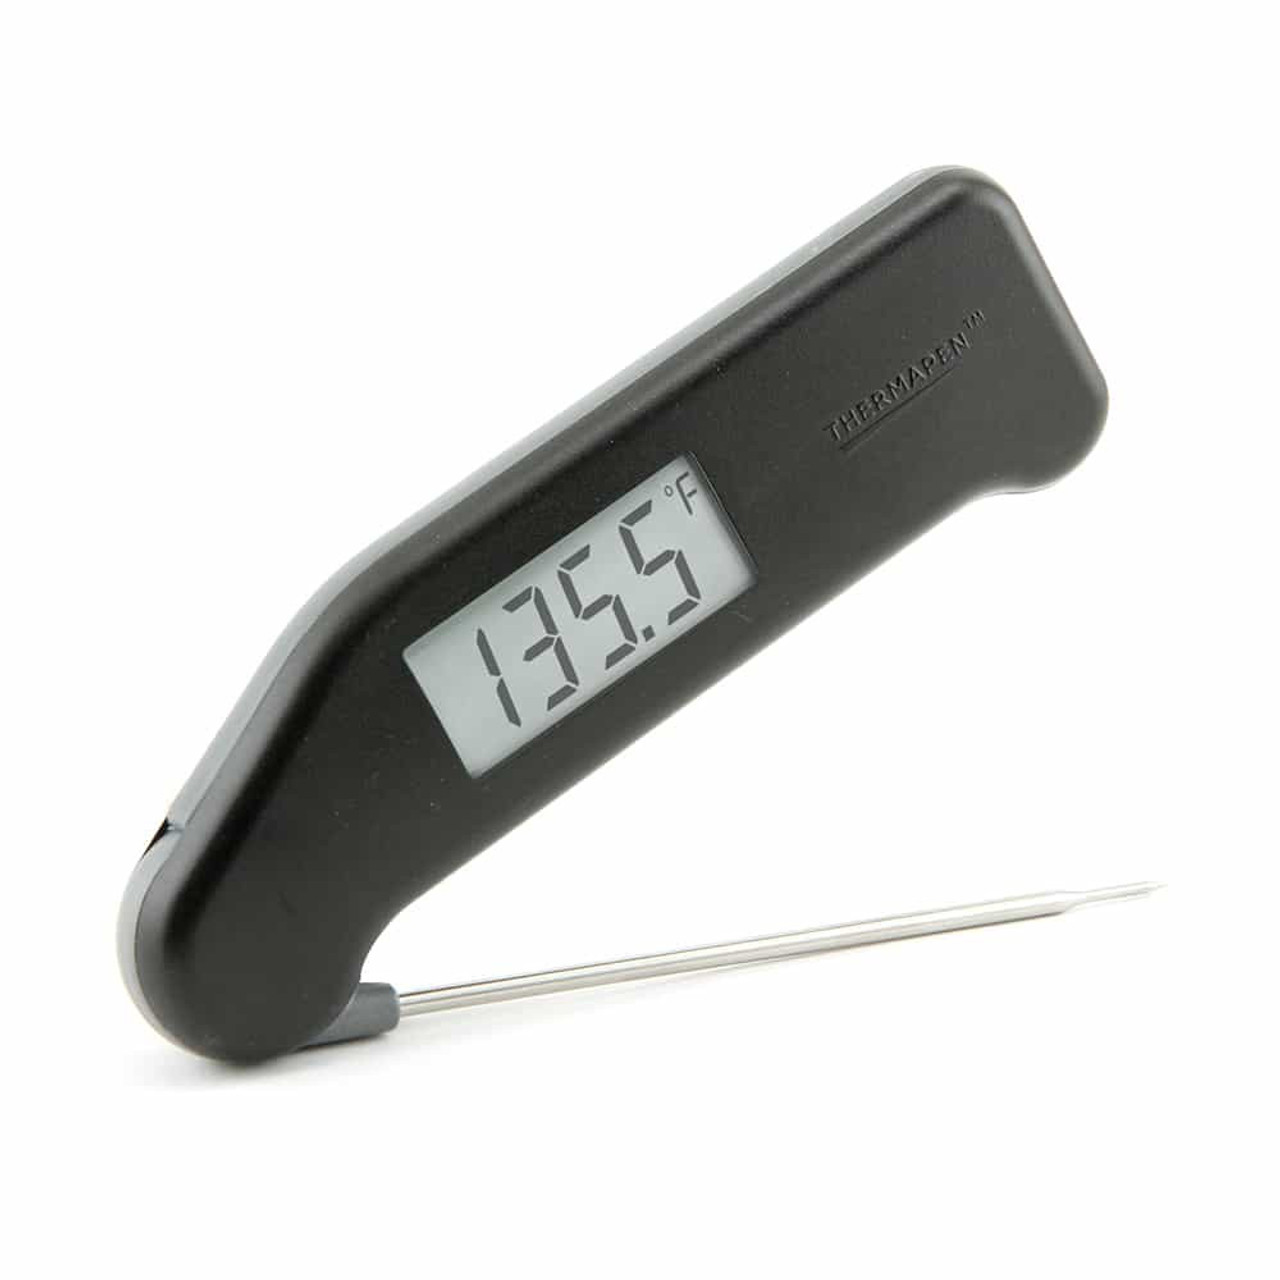 ThermoWorks Thermapen Review - 40+ Hour Product Test